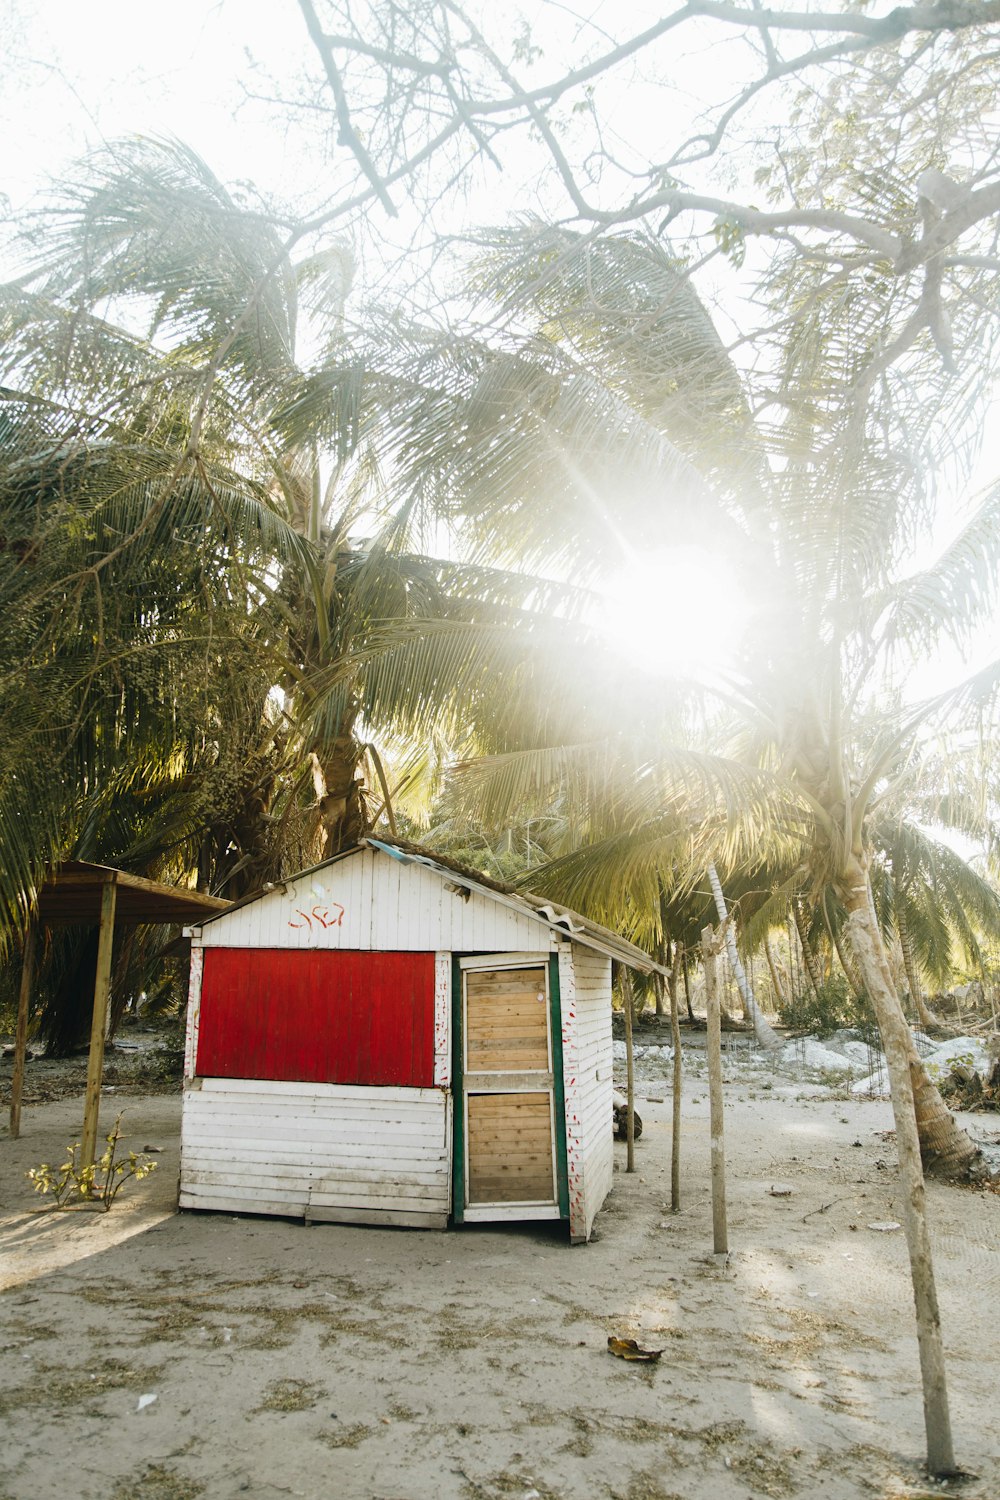 white and red wooden shed surrounded by palm trees